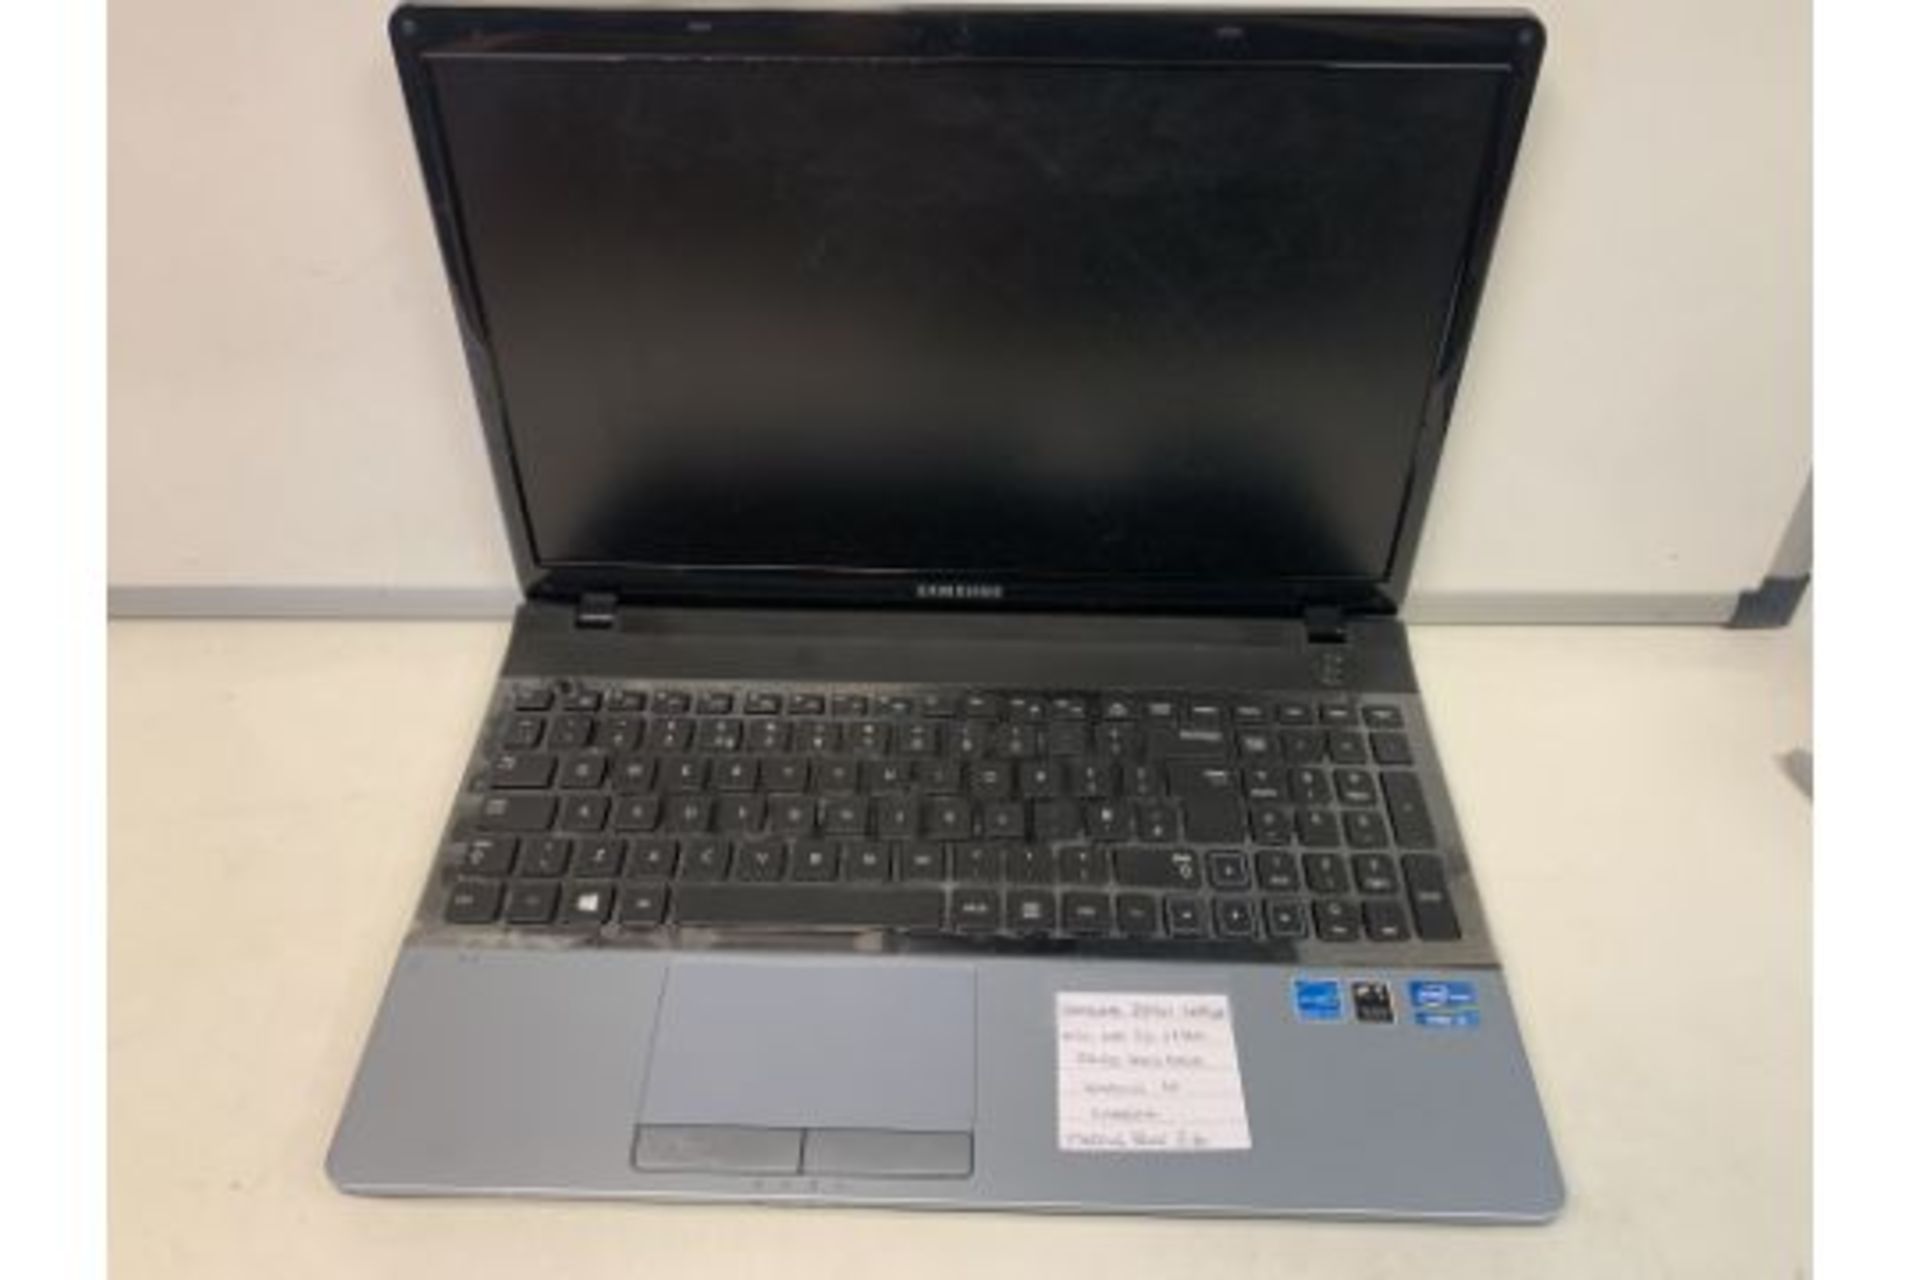 SAMSUNG 3530 LAPTOP, INTEL CORE i3-2328M, 320GB HARD DRIVE, WINDOWS 10 WITH CHARGER (79) (847/3)